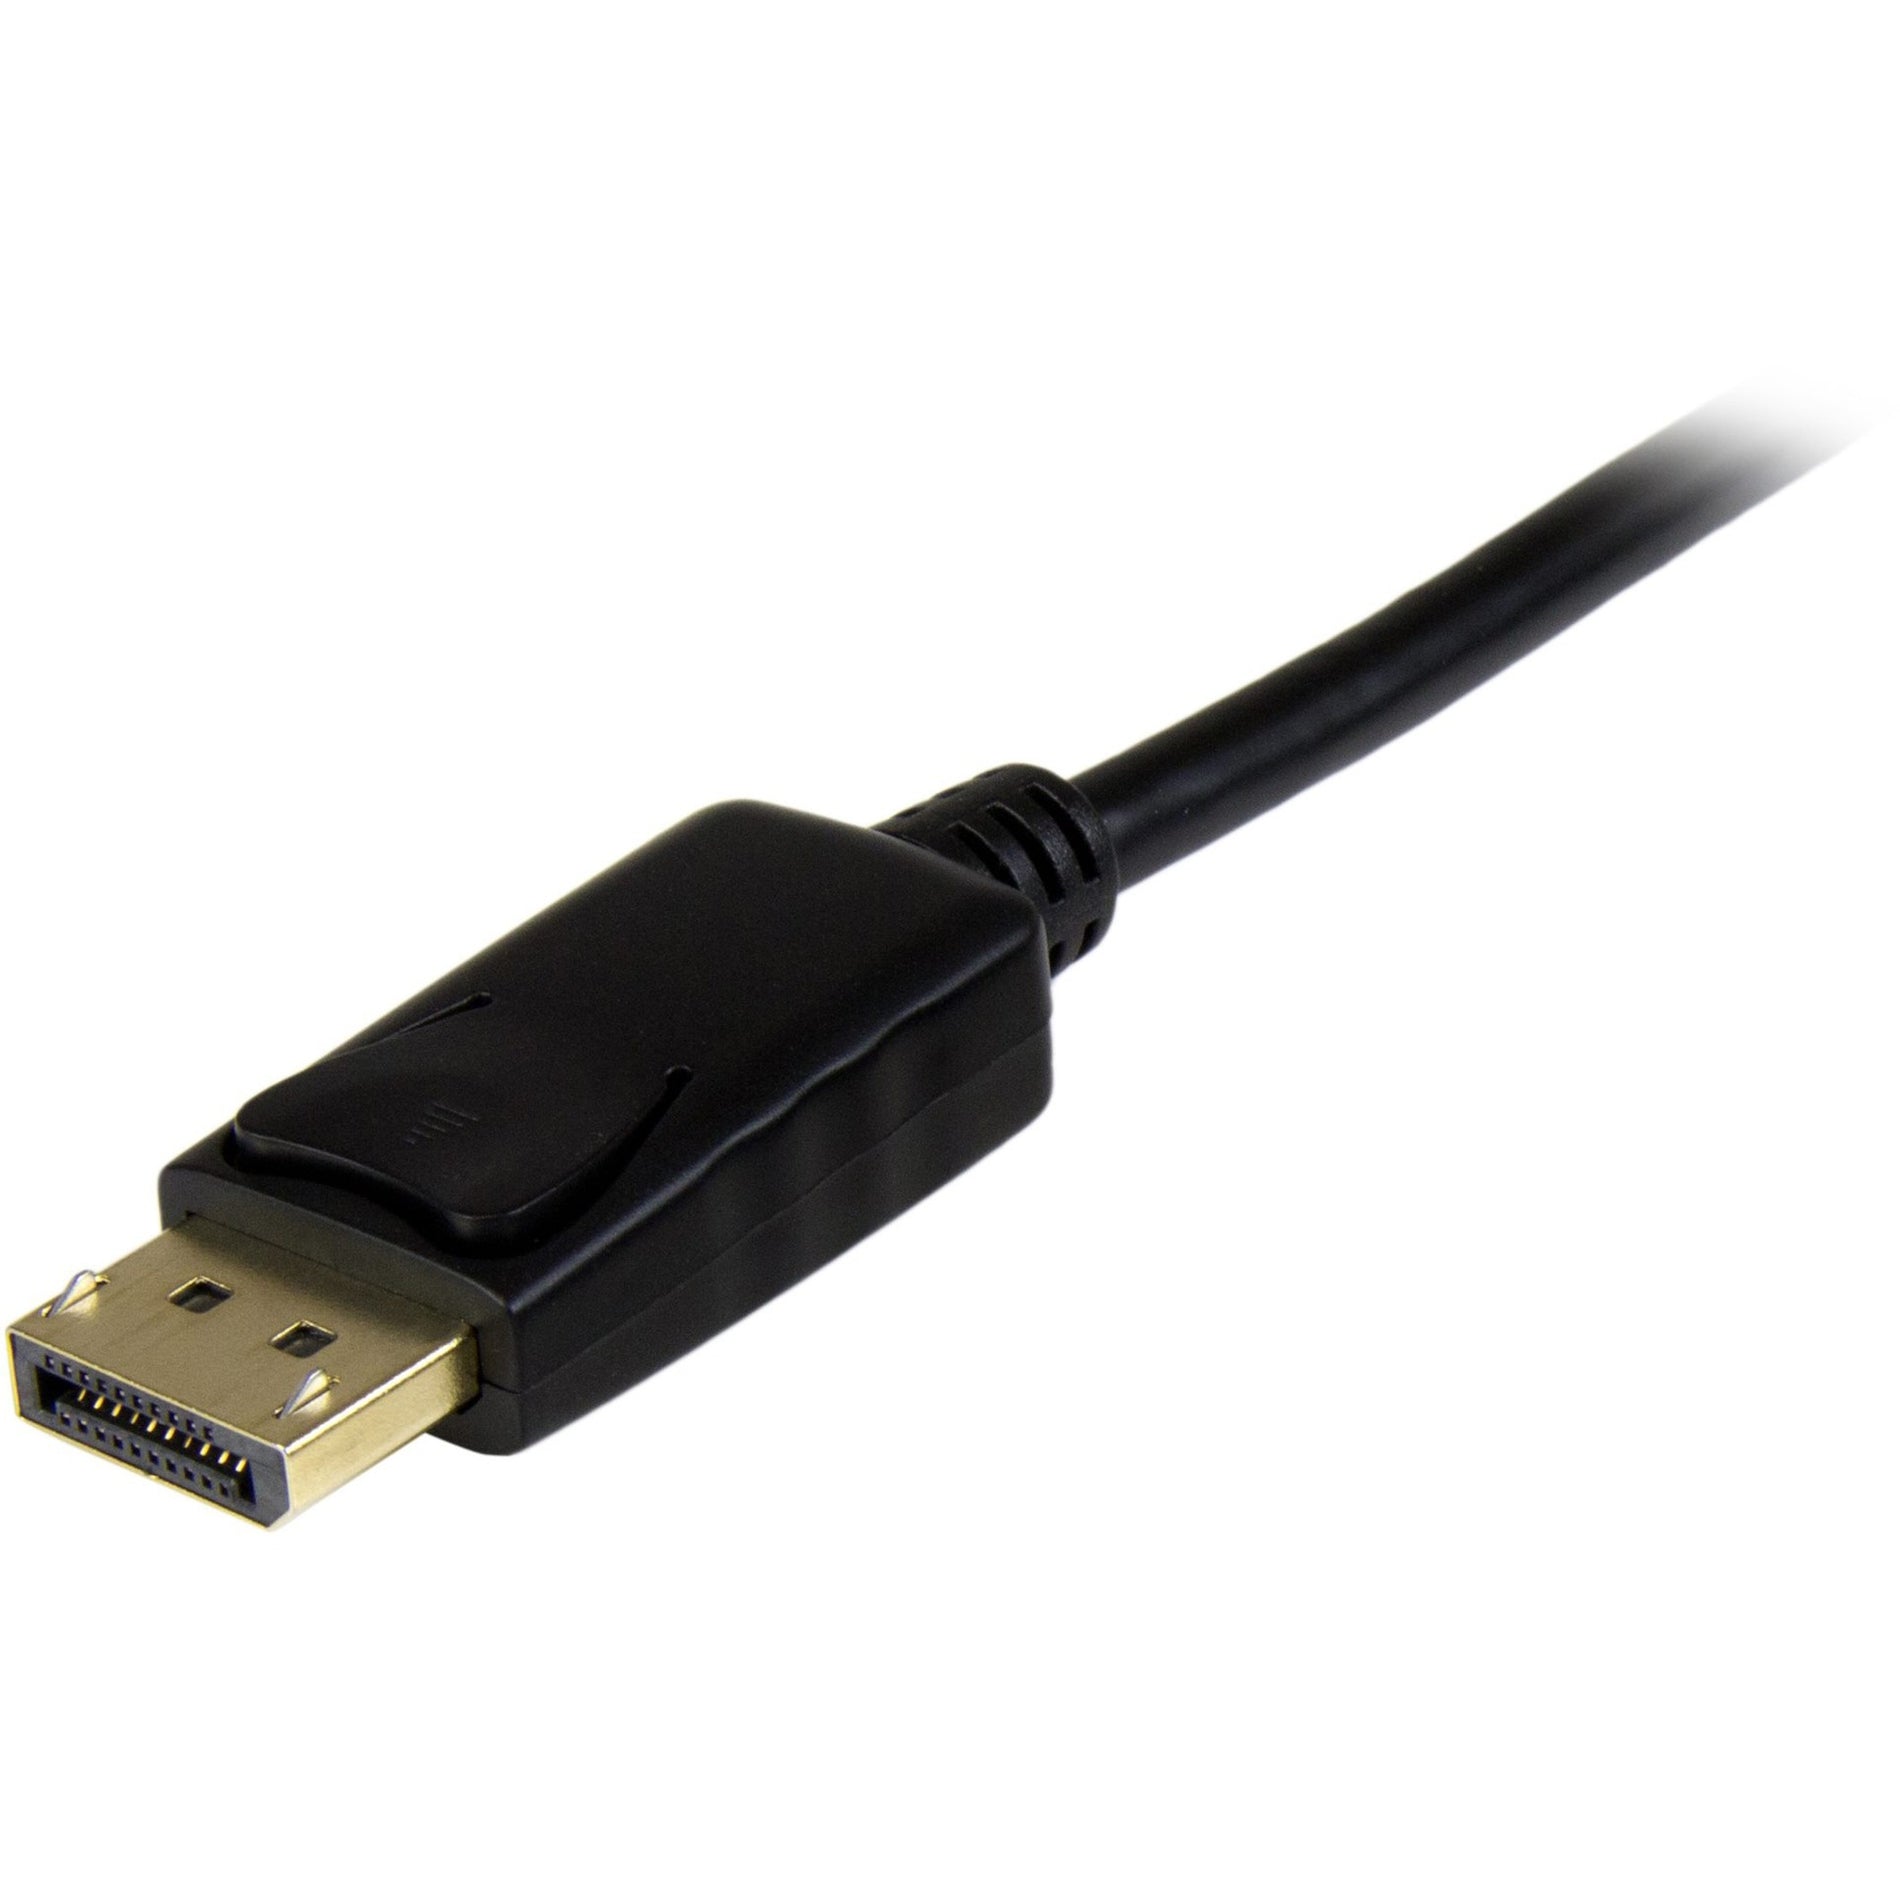 StarTech.com DP2HDMM1MB DisplayPort to HDMI Converter Cable 4K, 3 ft - Flexible, HDCP 1.4